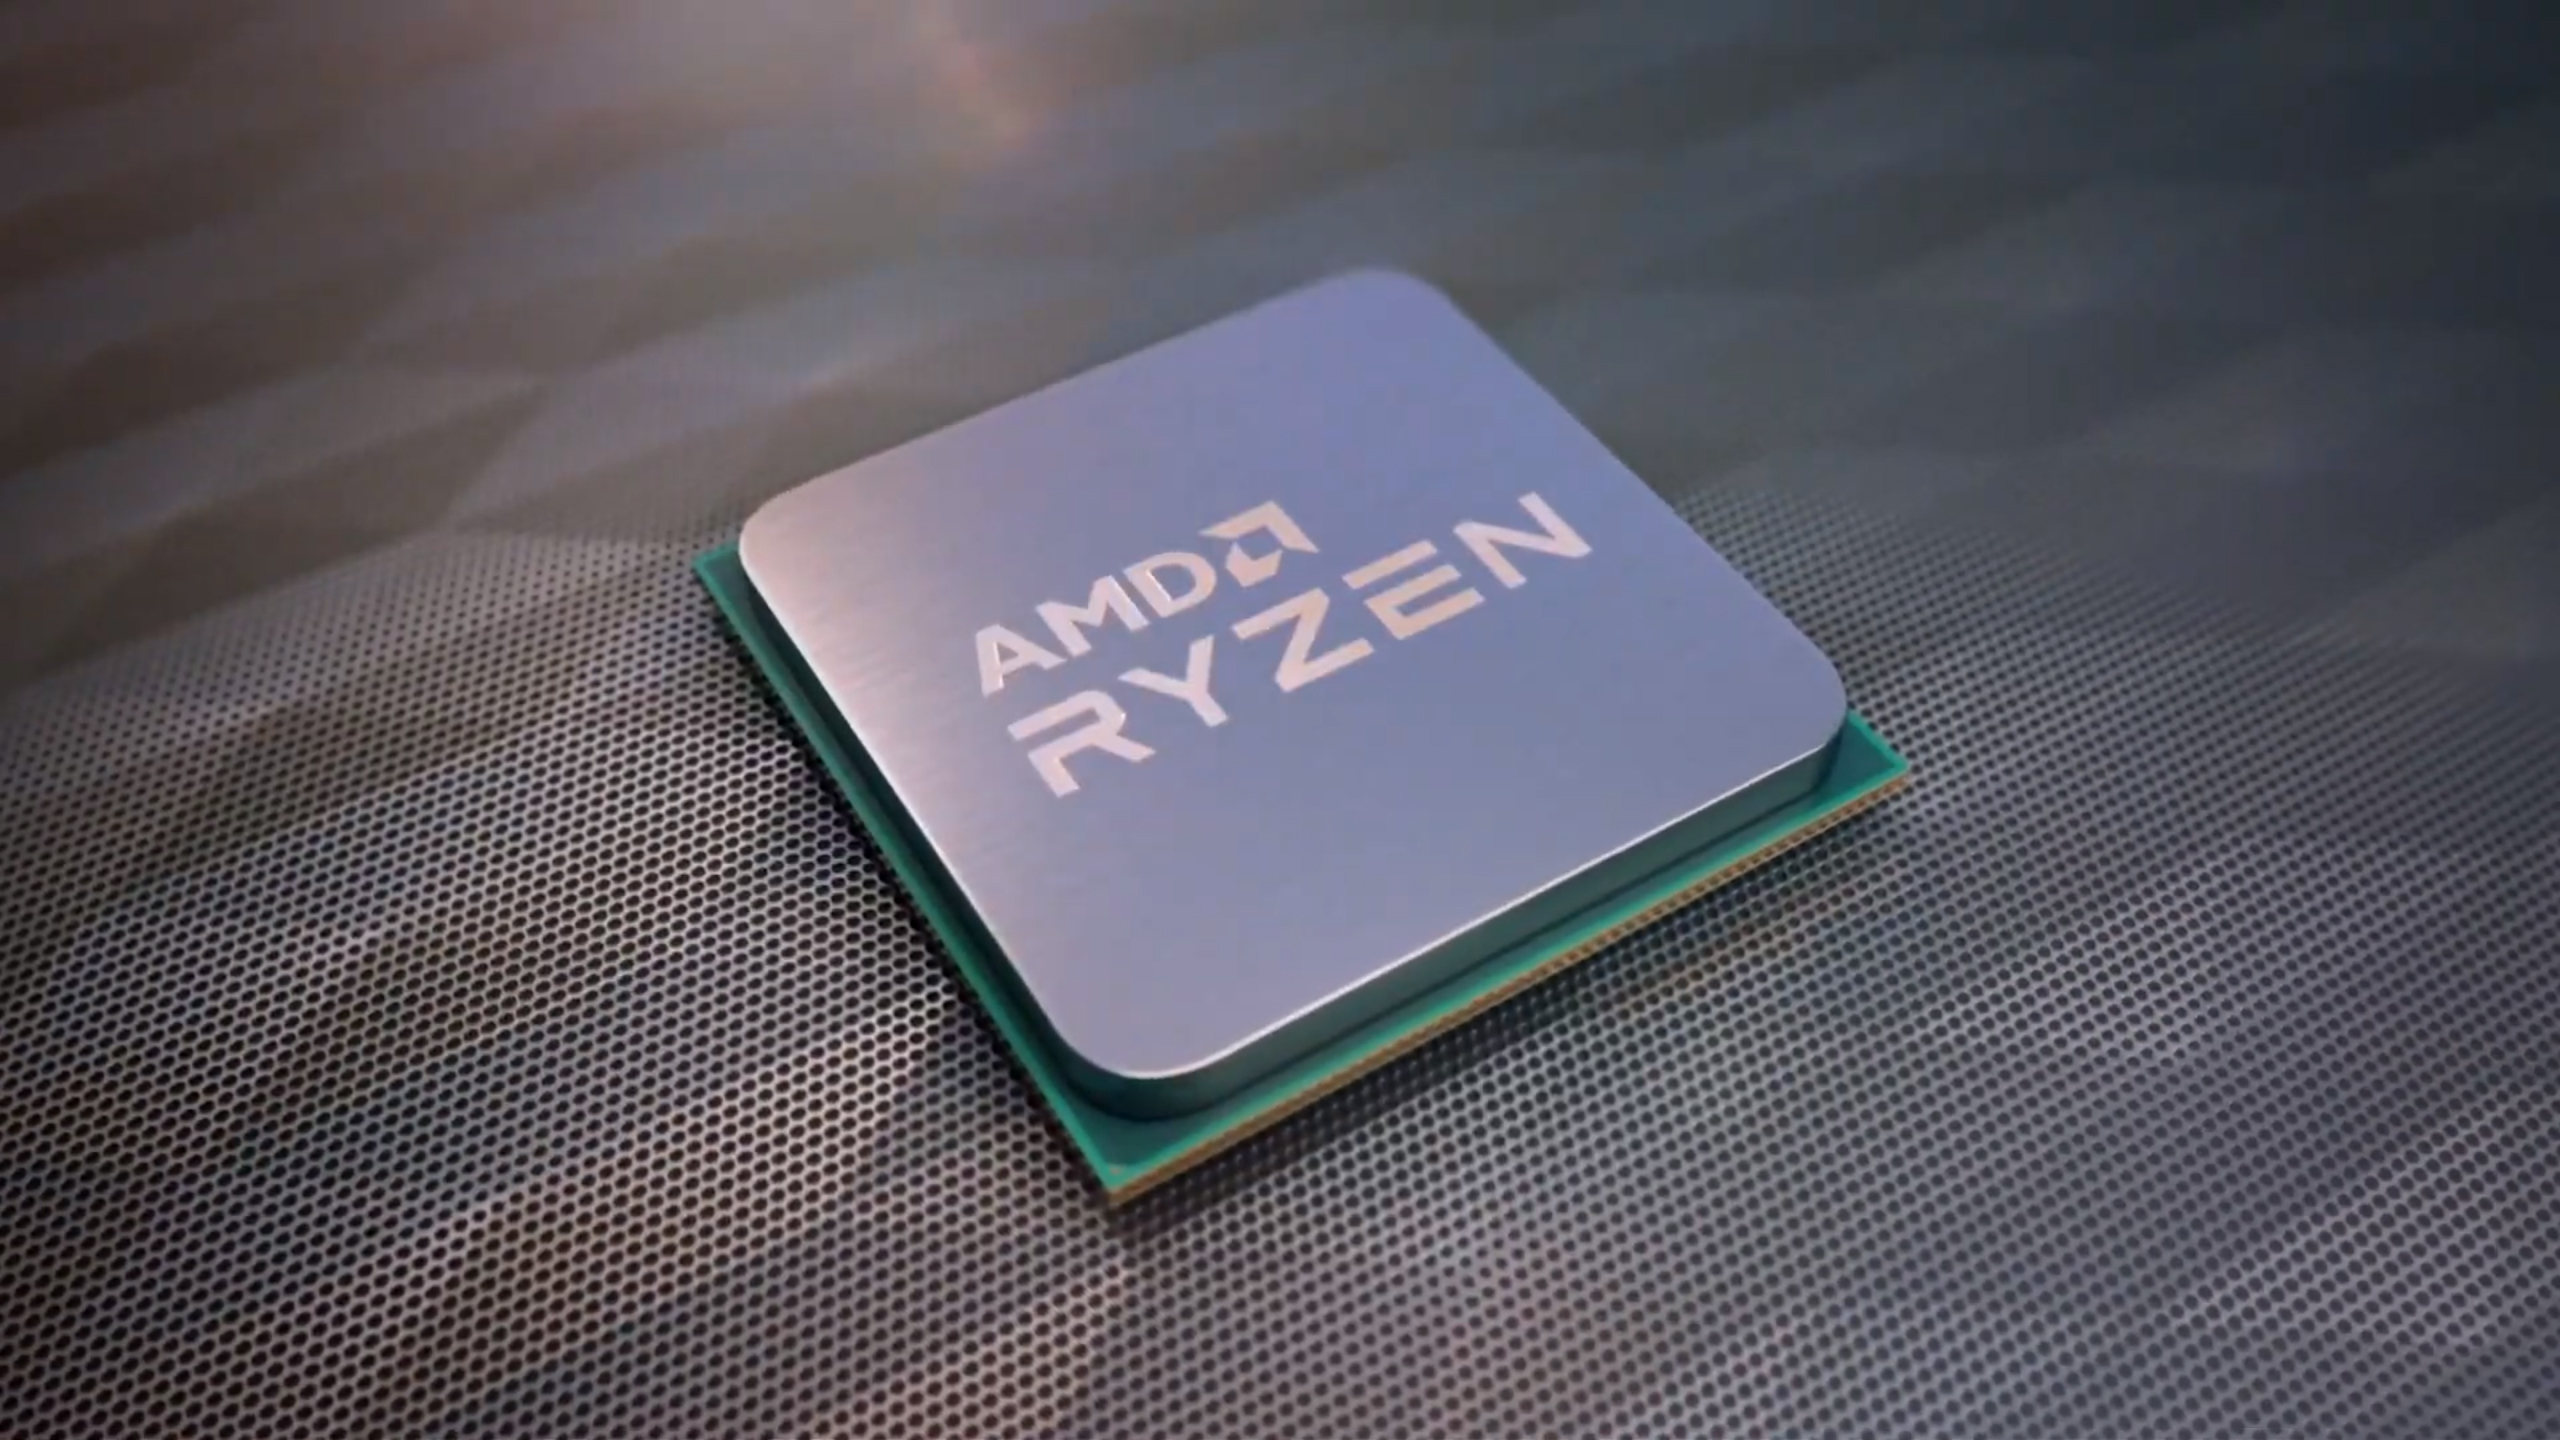 AMD Ryzen 7 5700G and Ryzen 5 5600G to launch for DIY market on August 5th  